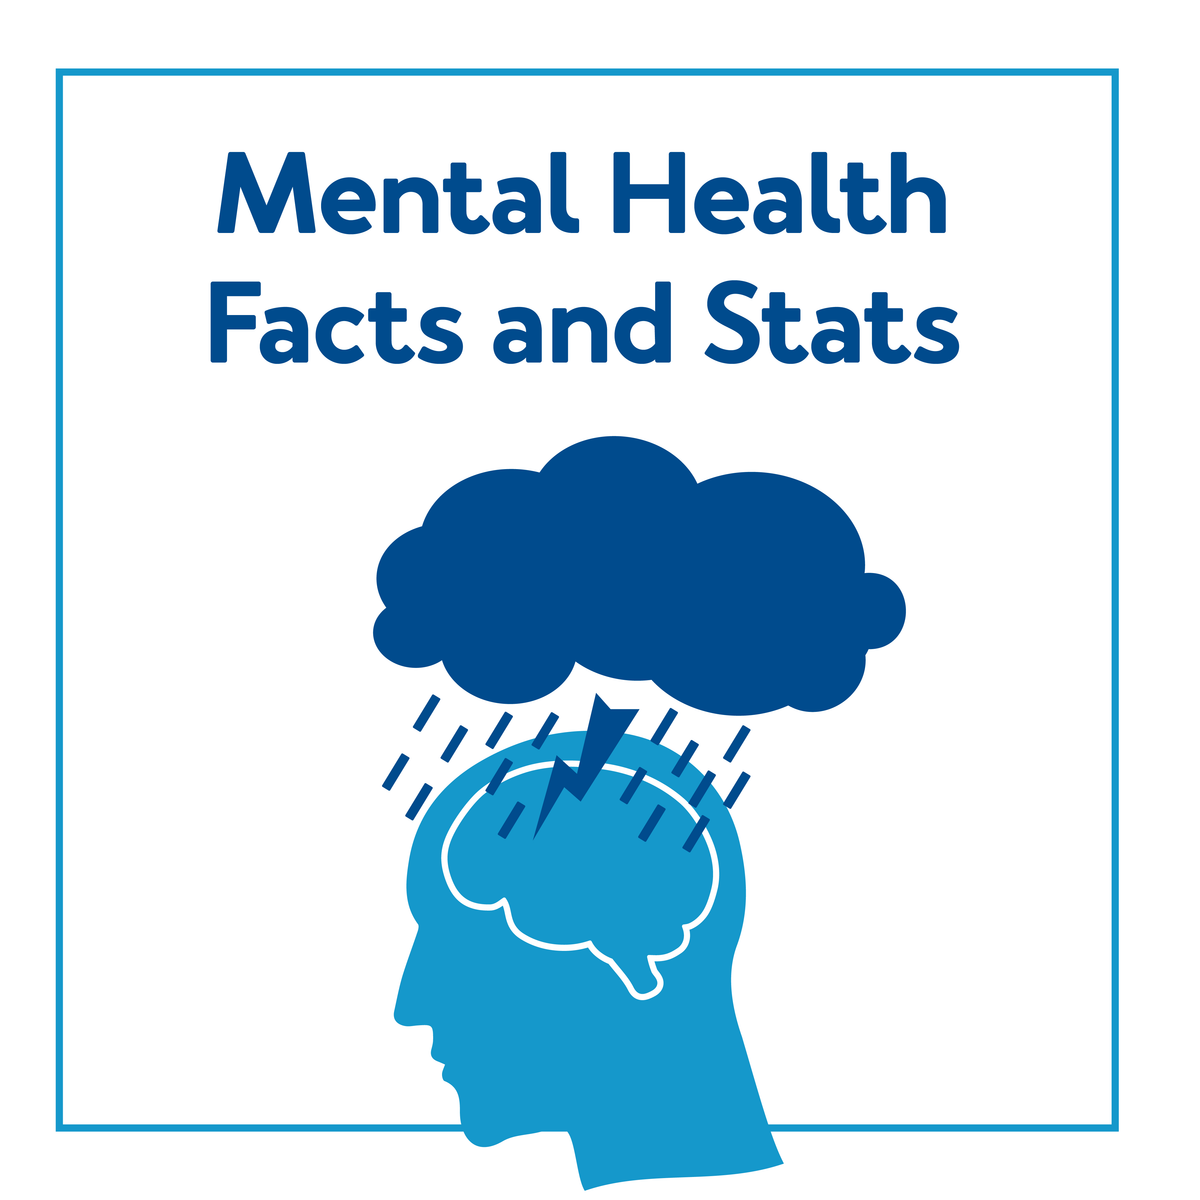 A graphic of a head with rainy clouds over it. Text, “Mental Health Facts and Stats